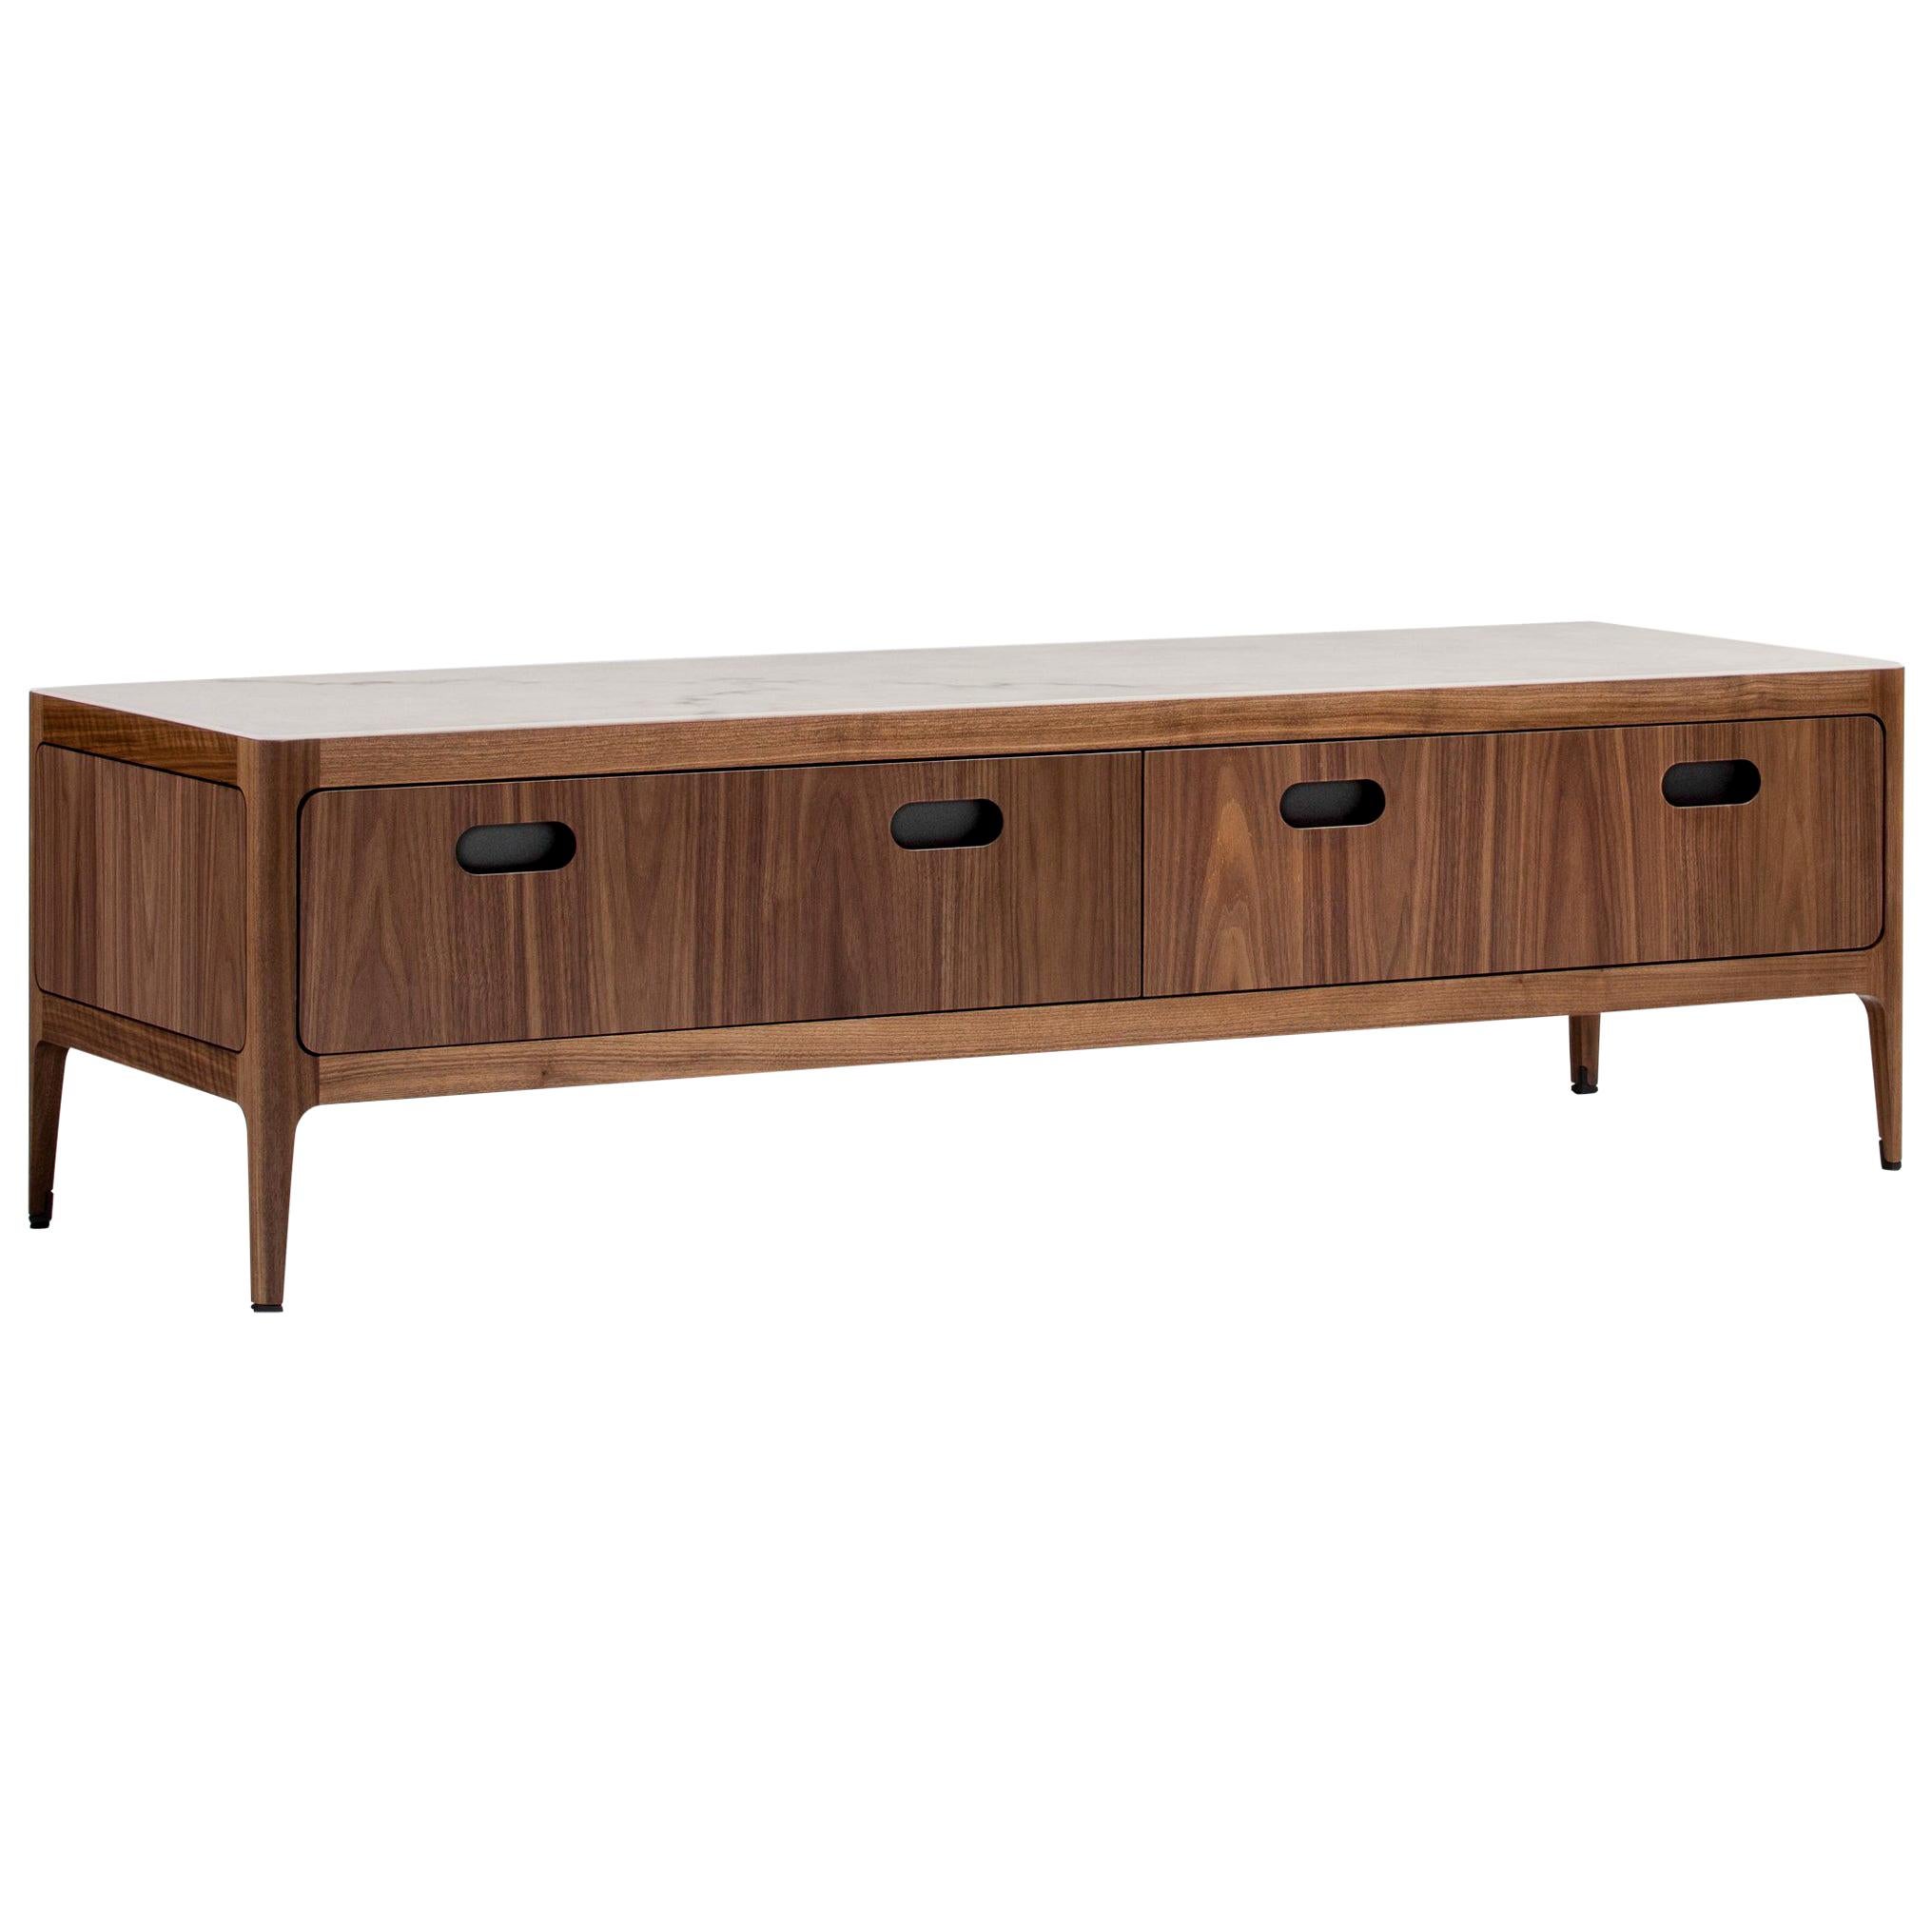 Low Console Table with Drawers in Walnut by Munson Furniture Sample For Sale